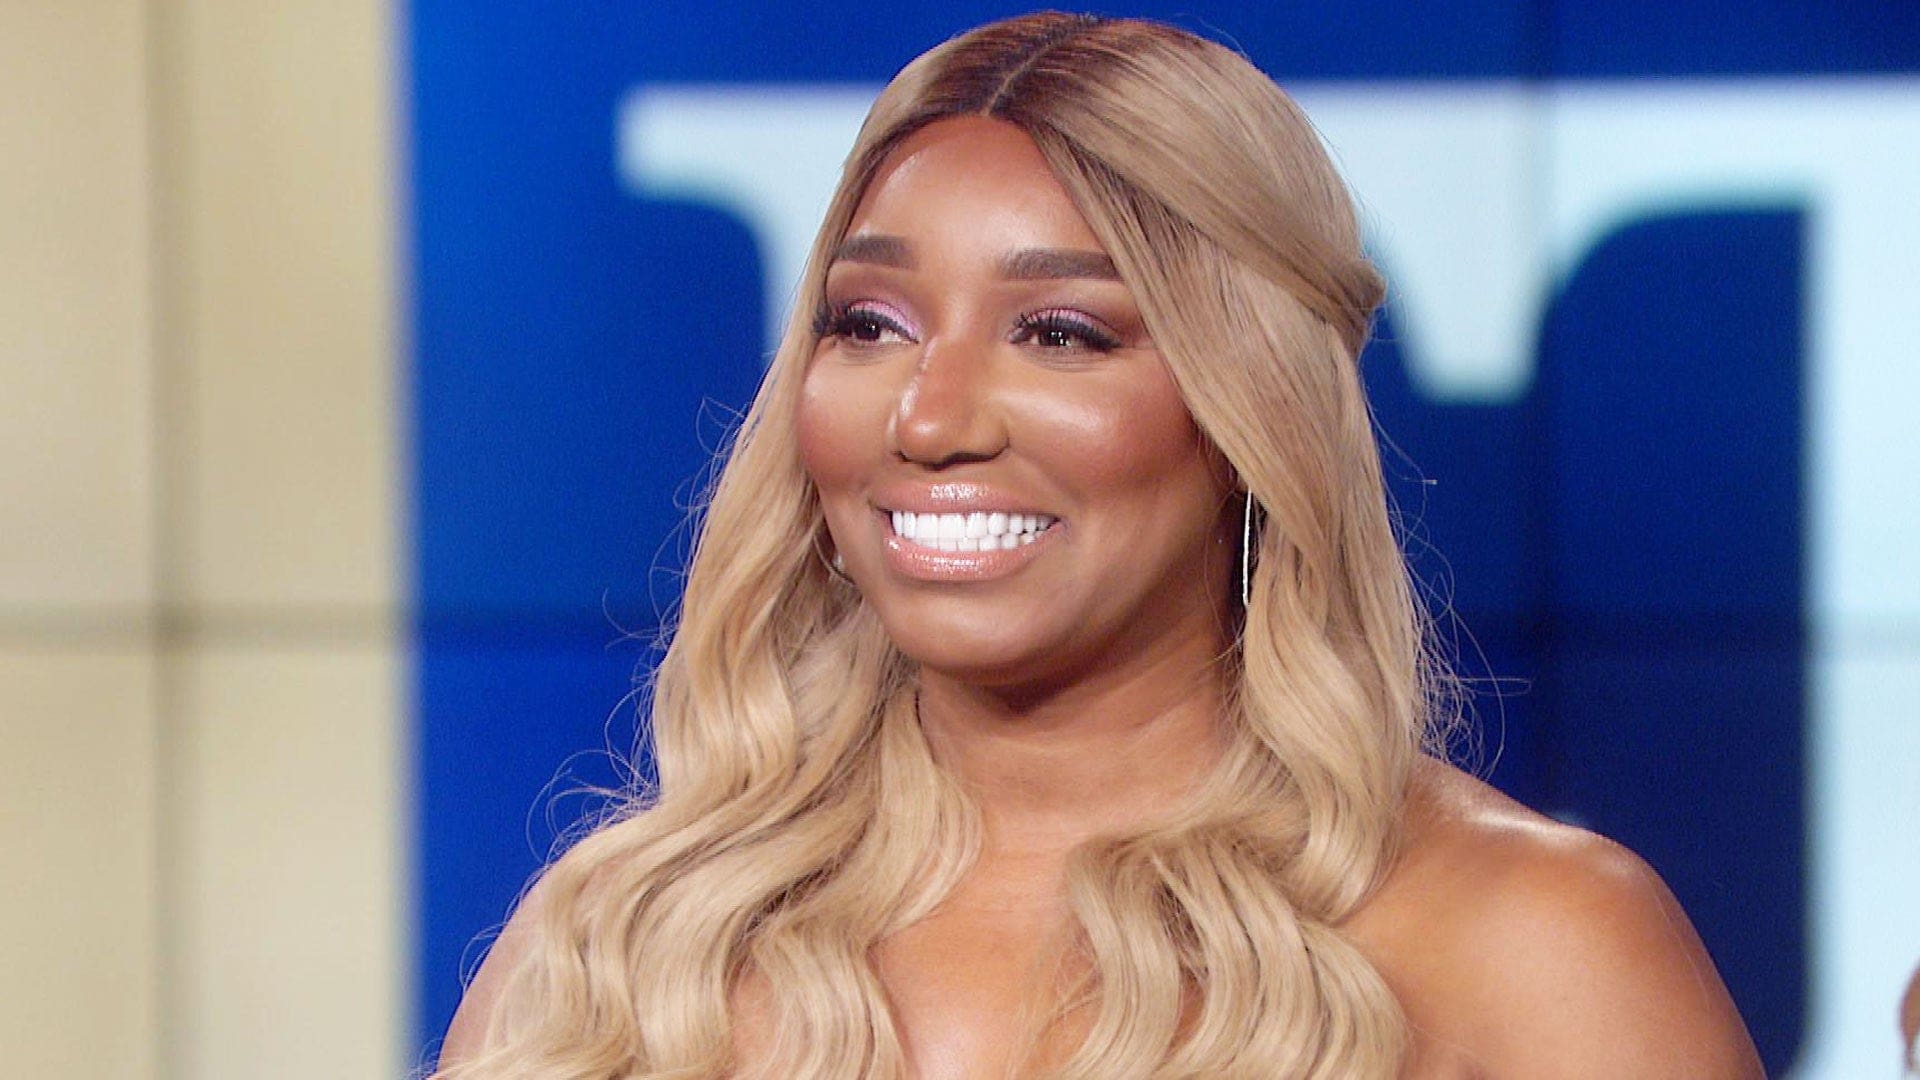 NeNe Leakes Looks 18 Years Old, Showing Off Her Cleavage - See The Photo